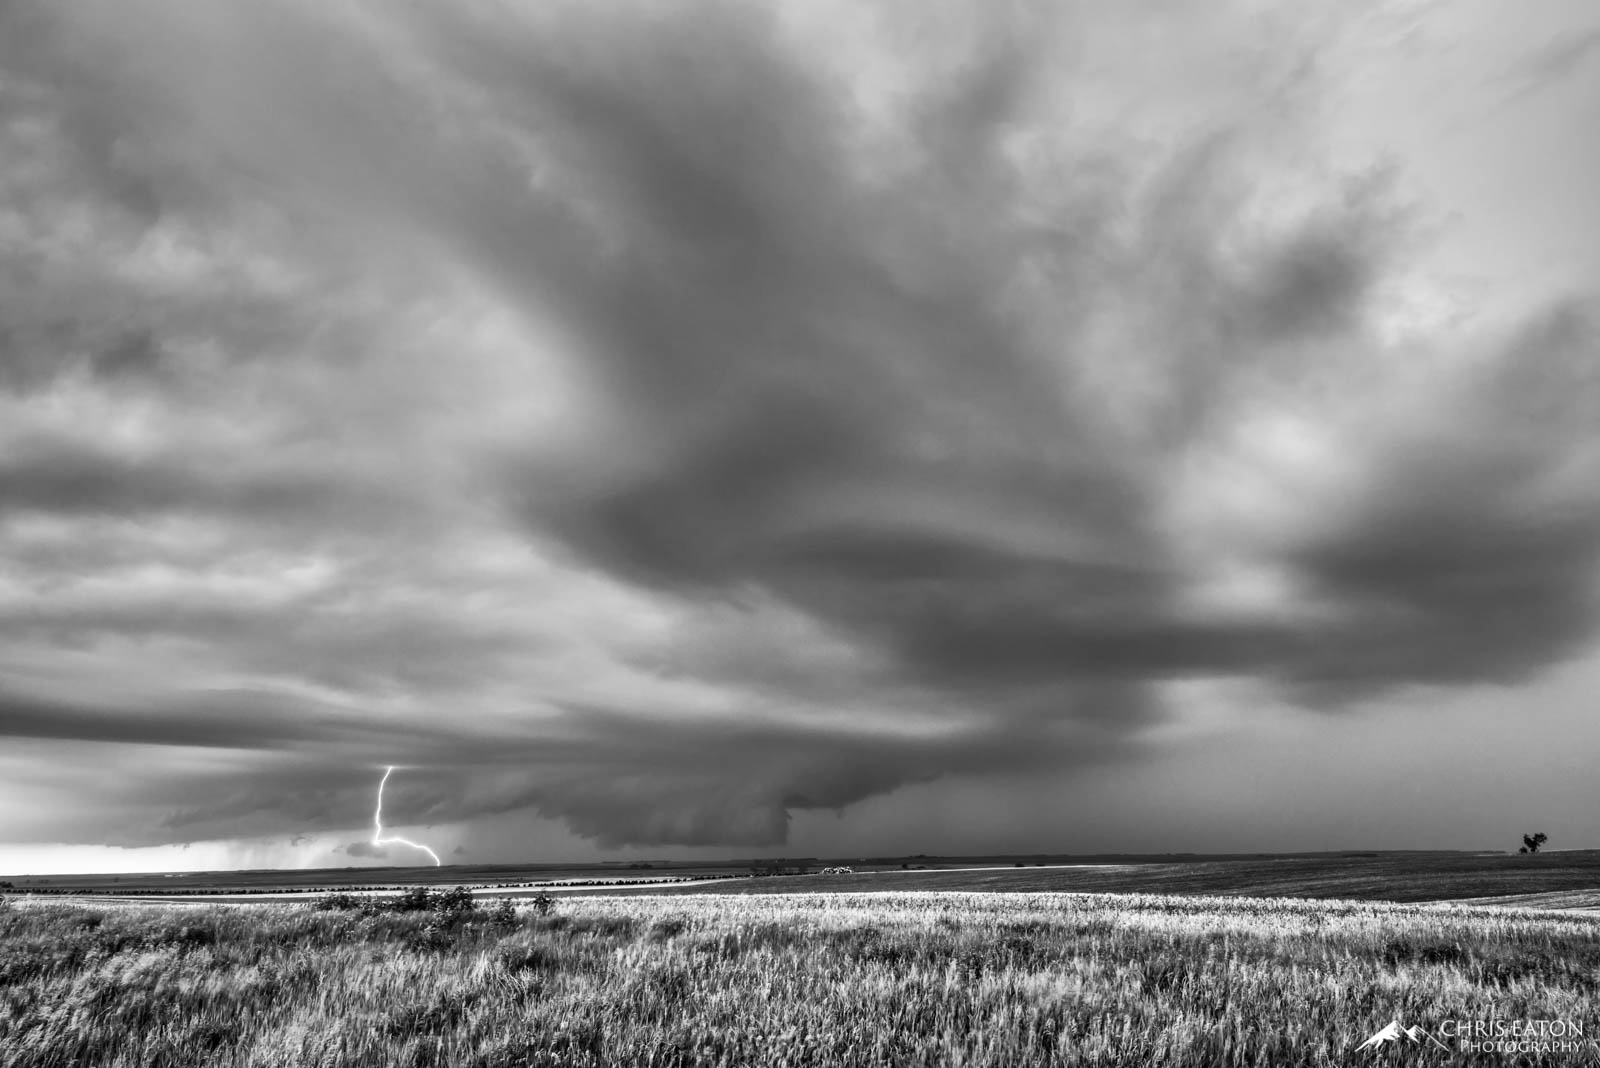 In late spring, a supercell thunderstorm builds over the Great Plains of the central United States. Supercell thunderstorms are...